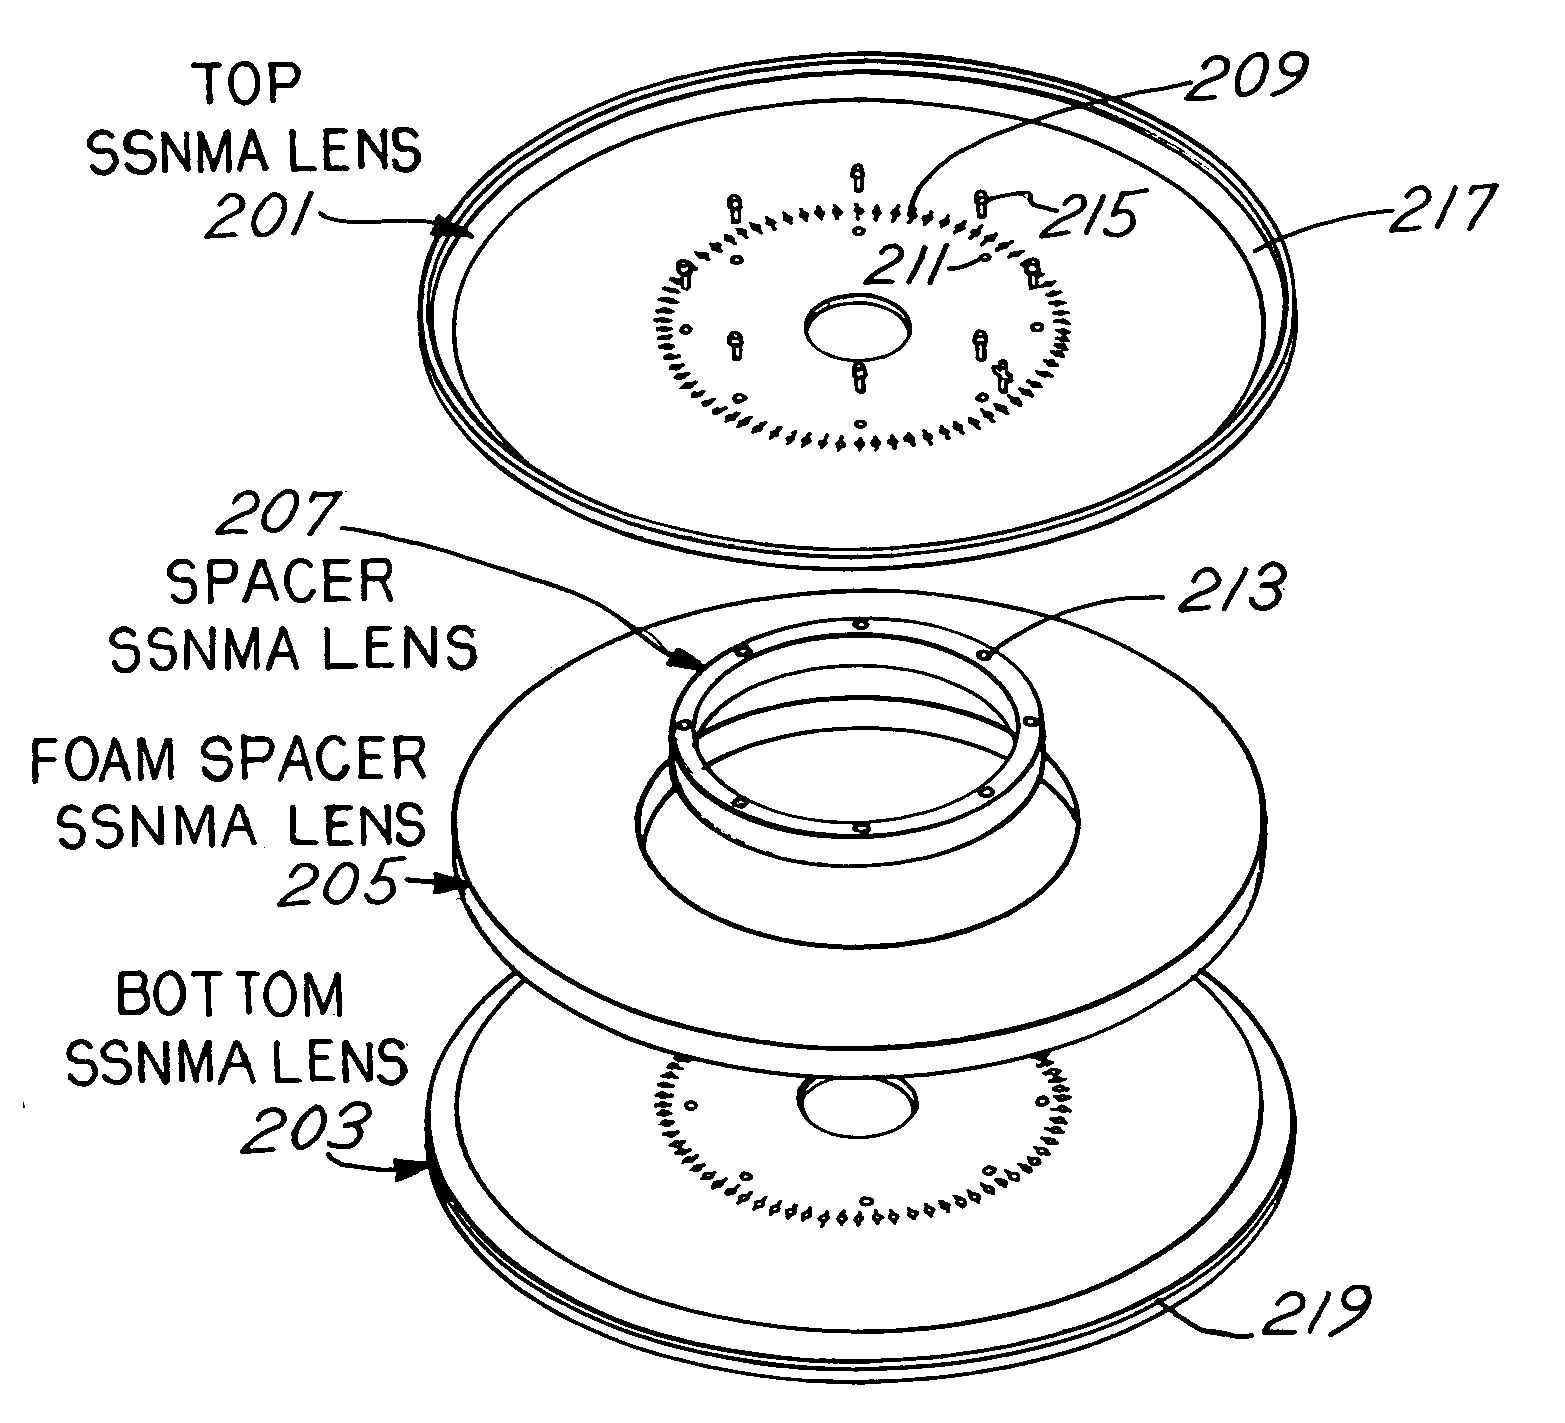 Radial constrained lens